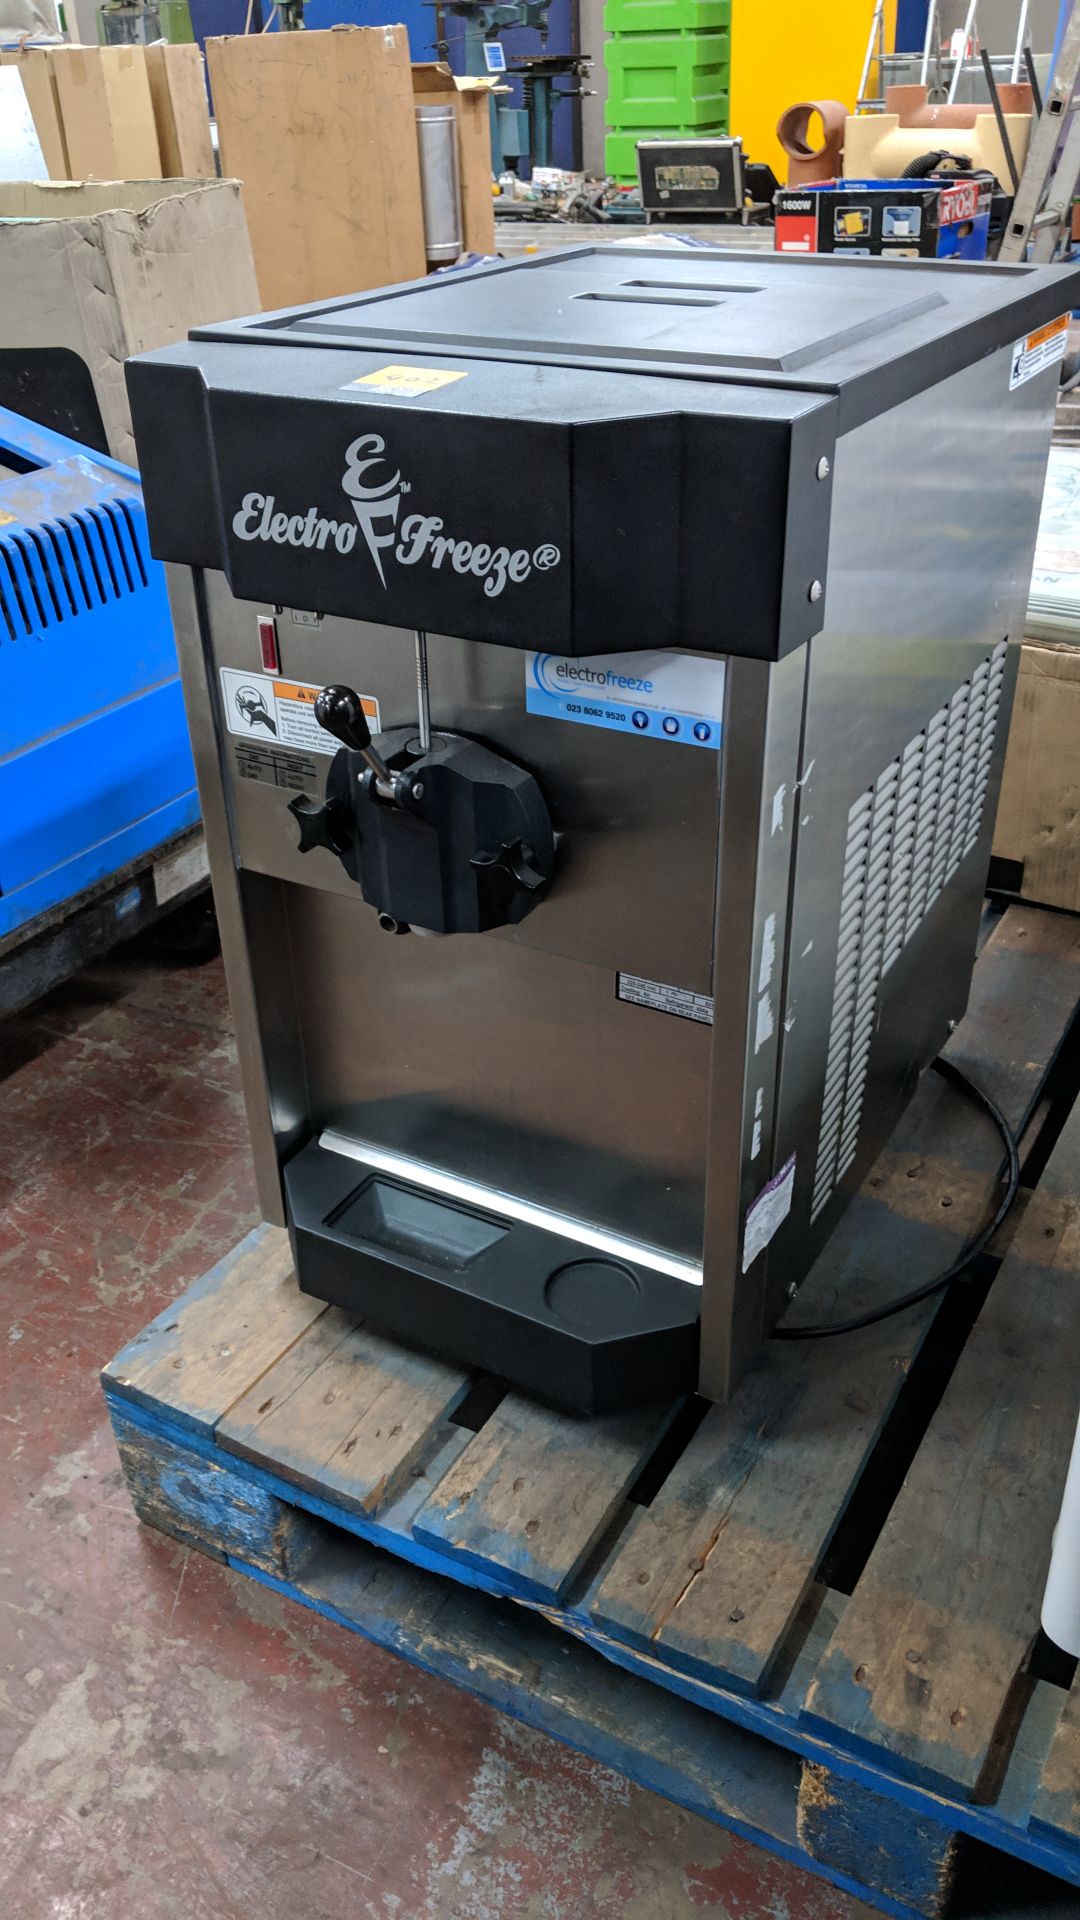 Electro Freeze soft serve ice cream machine model CS4-233, 1 Phase, air cooled, serial no. C2W- - Image 13 of 13